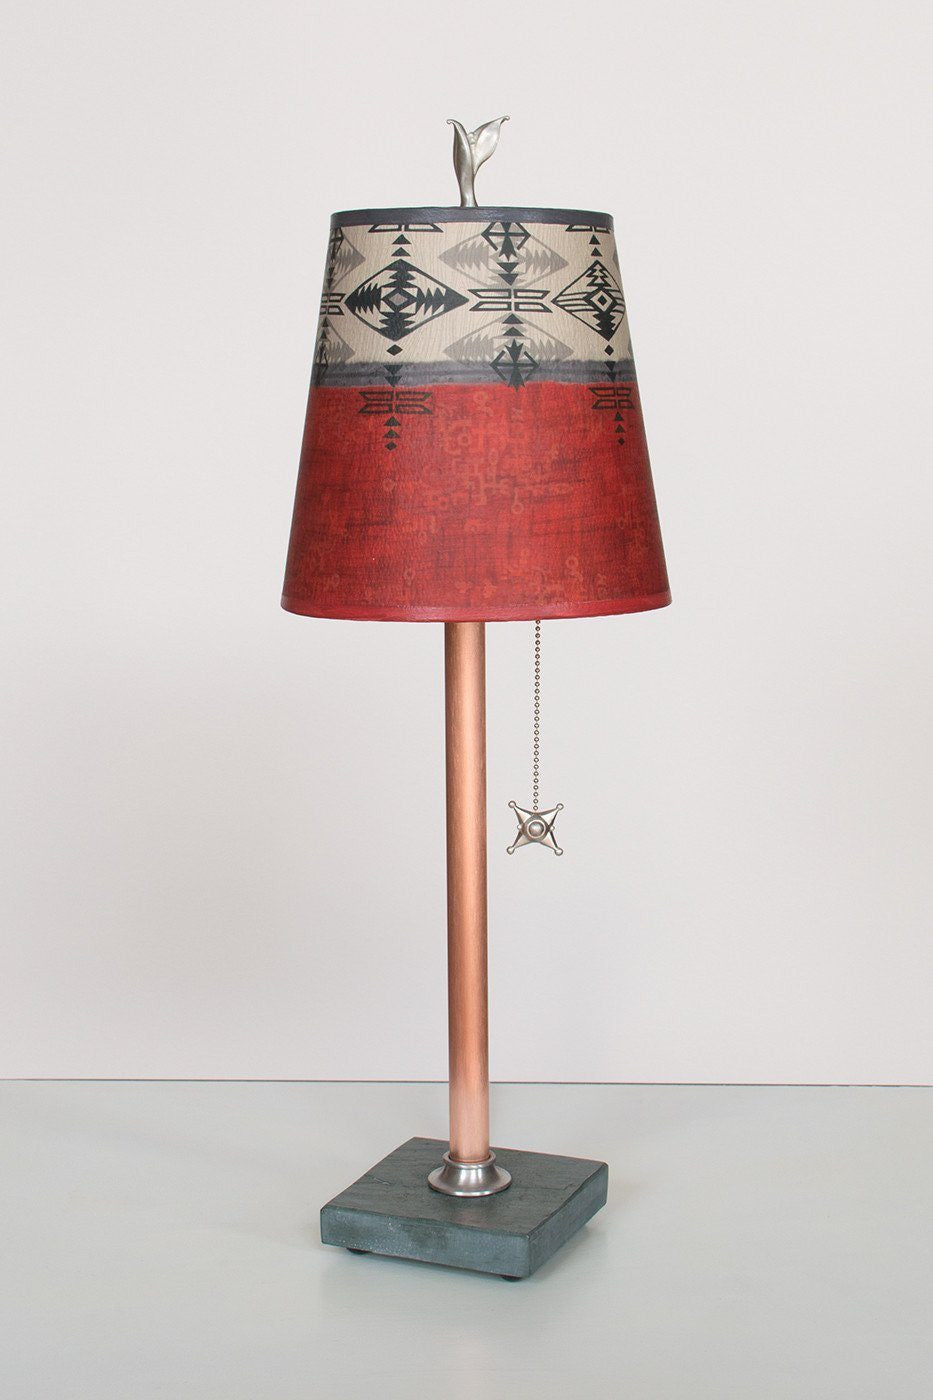 Janna Ugone & Co Table Lamps Copper Table Lamp with Small Drum Shade in Mesa